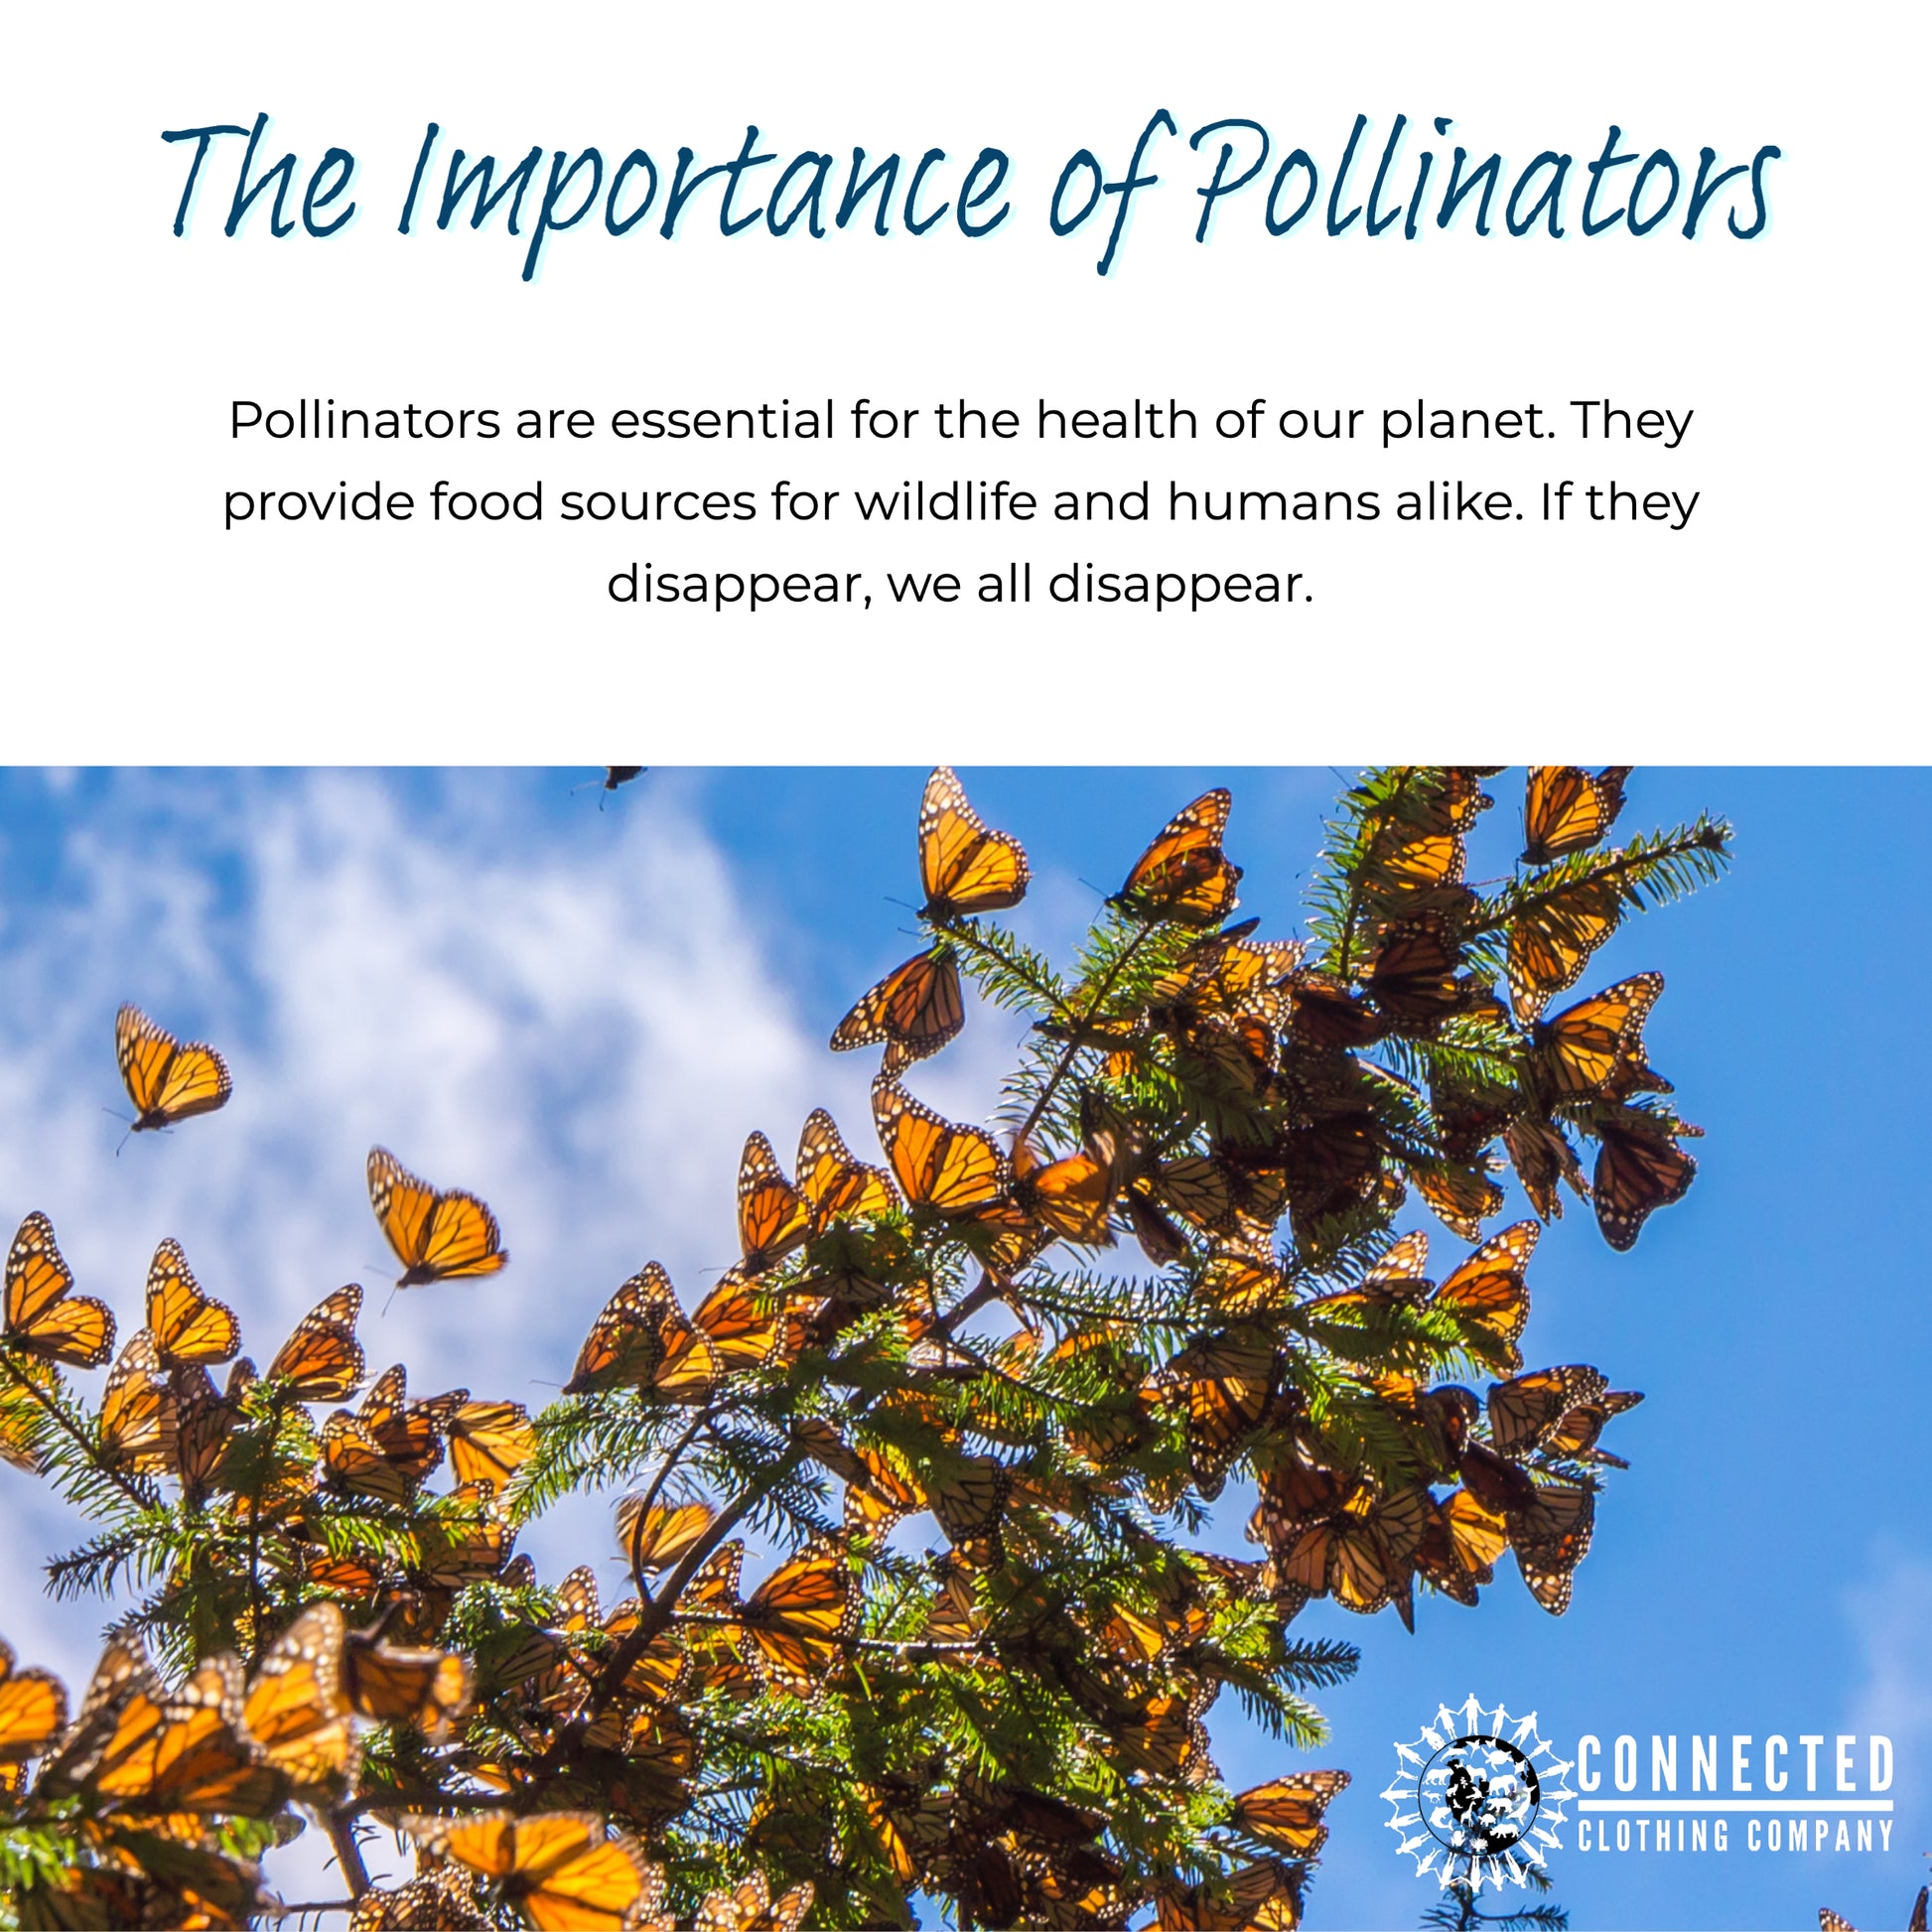 the importance of pollinators. pollinators are essential for the health of our planet. they provide food sources for wildlife and humans alike. If they disappear, we all disappear.